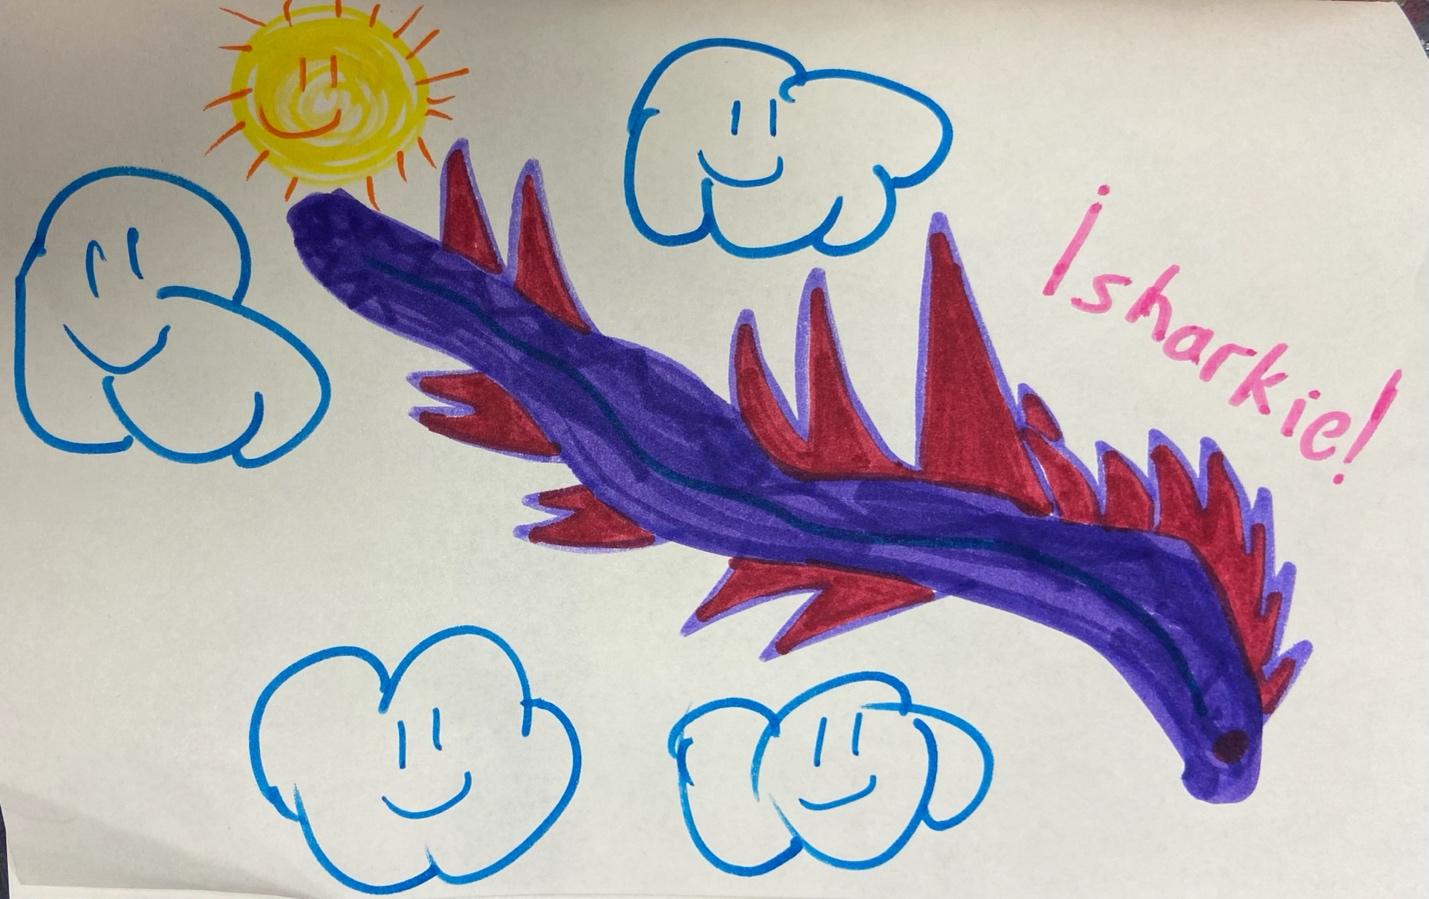 A drawing of a dragon and clouds

Description automatically generated